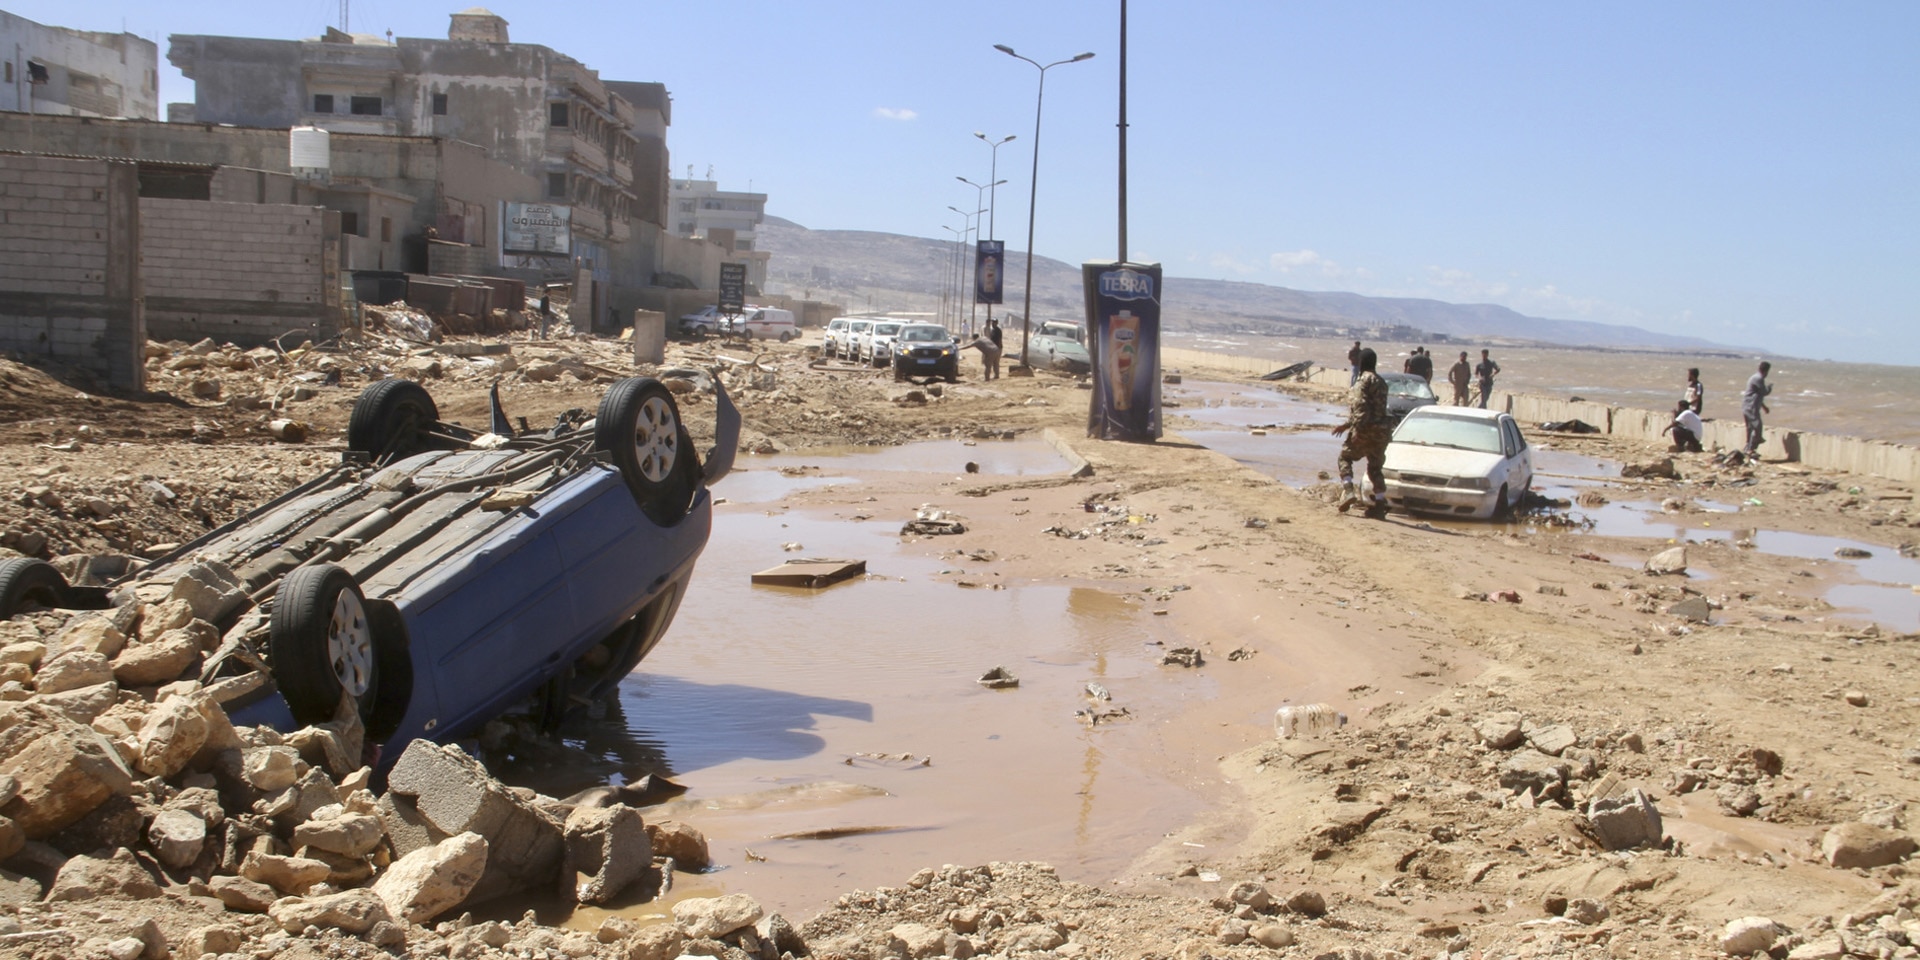 A car lies on its roof in mud and wall remains. People search for victims of the flood in the background.